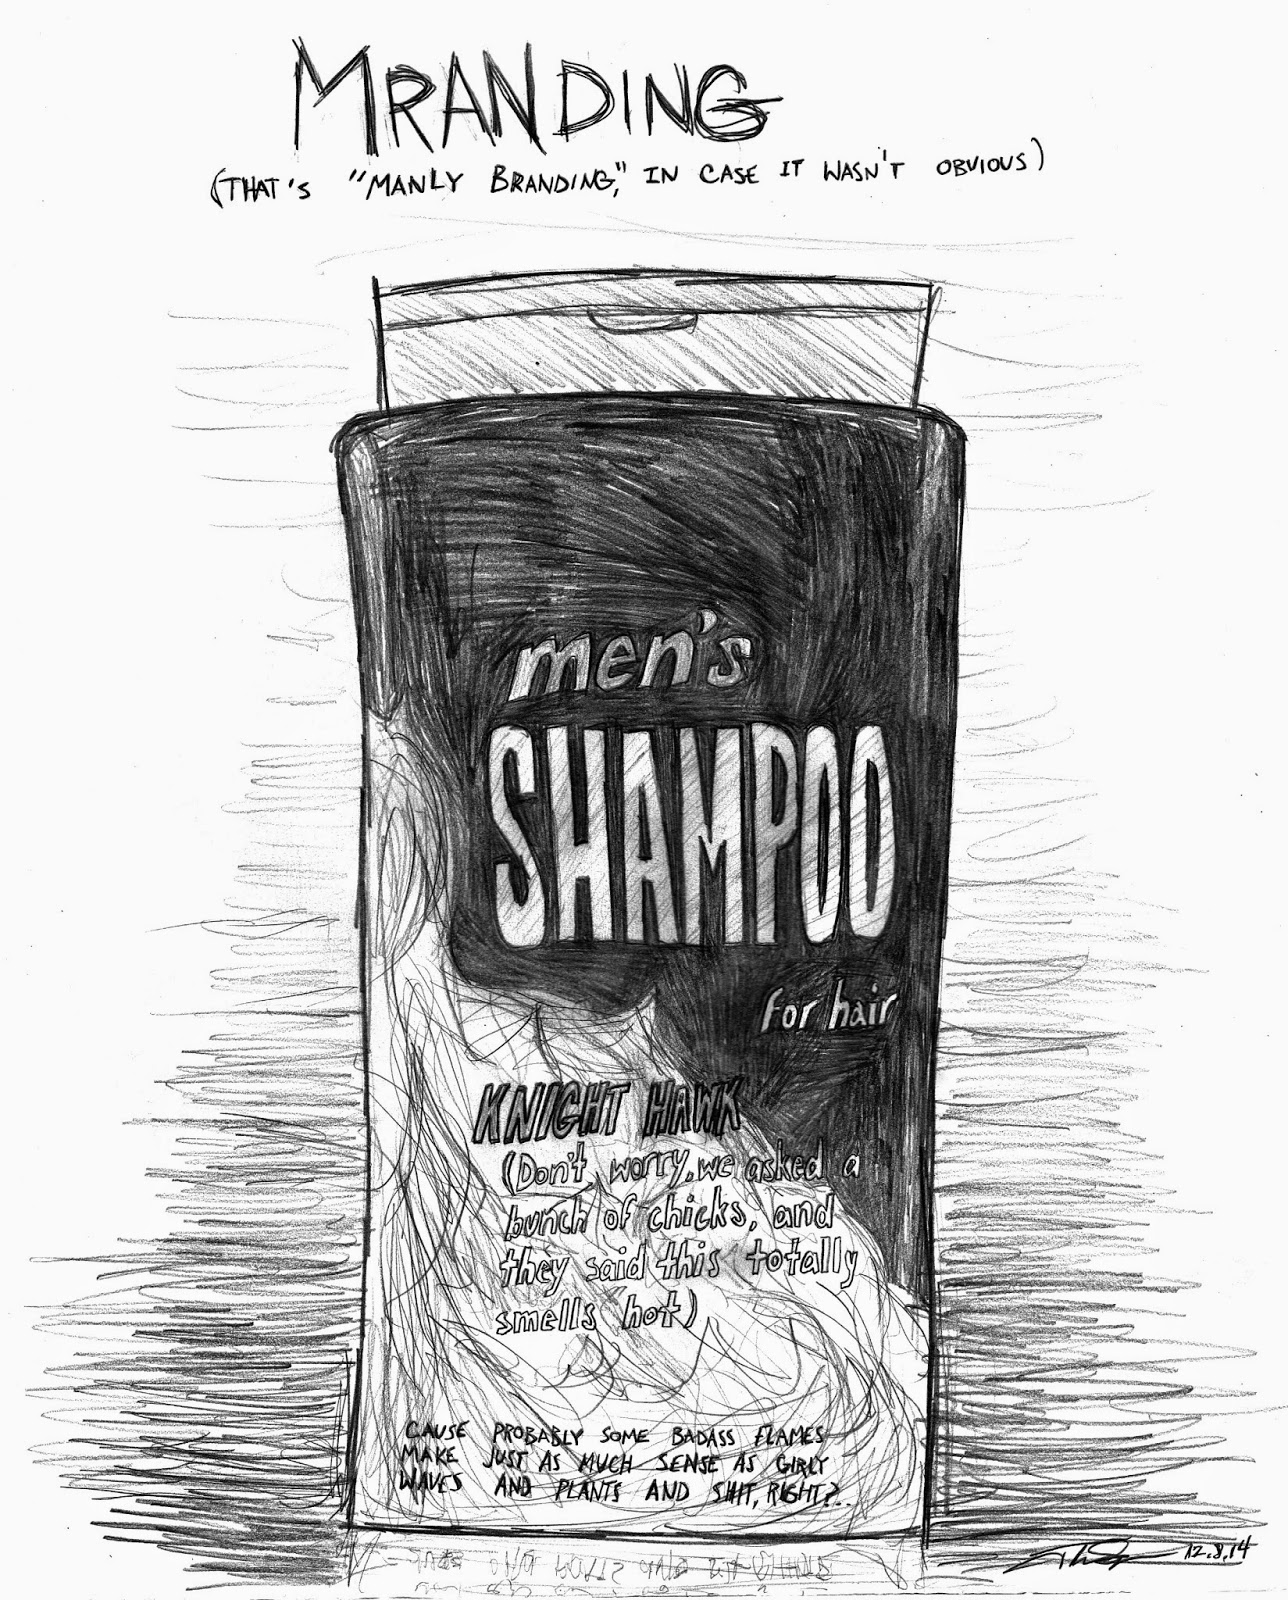 "MRANDING" (That's 'Manly Branding,' in case it wasn't obvious)" MEN"S SHAMPOO for hair ~ Knight Hawk (Don't worry, we asked a bunch of chicks, and they said this totally smells hot. ~ Cause probably some badass flames make just as much sense as sense as girly waves and plants and sh*t, right?"